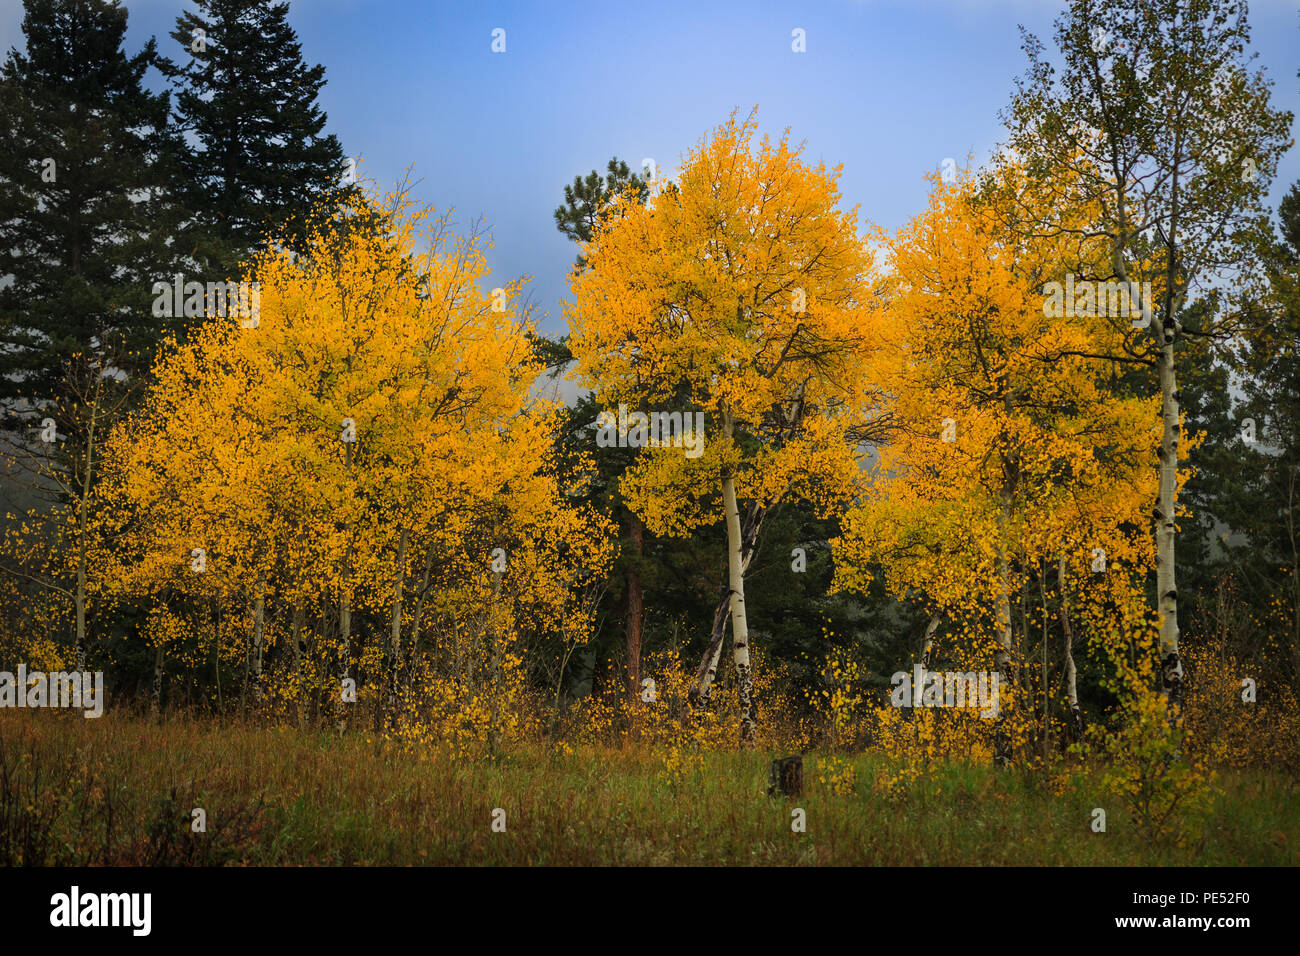 Stand of brilliant yellow aspen trees changing colors amidst pine trees on a misty fall morning in the Rocky Mountains Stock Photo